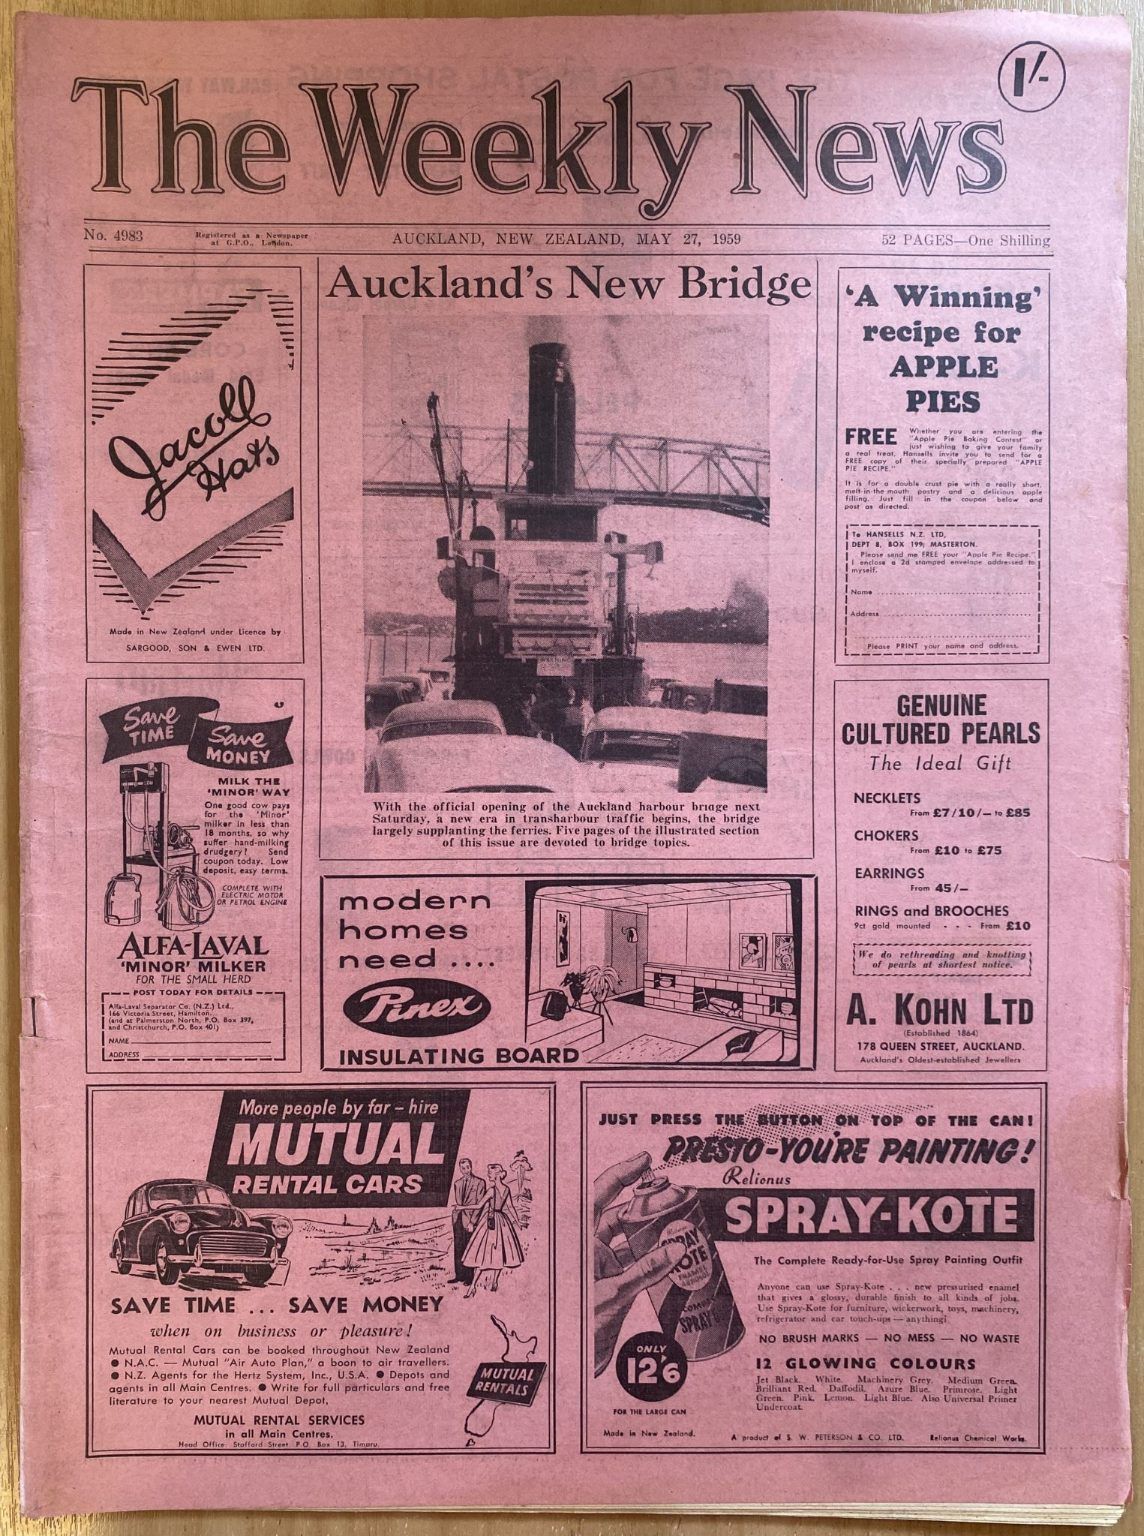 OLD NEWSPAPER: The Weekly News - No. 4983, 27 May 1959